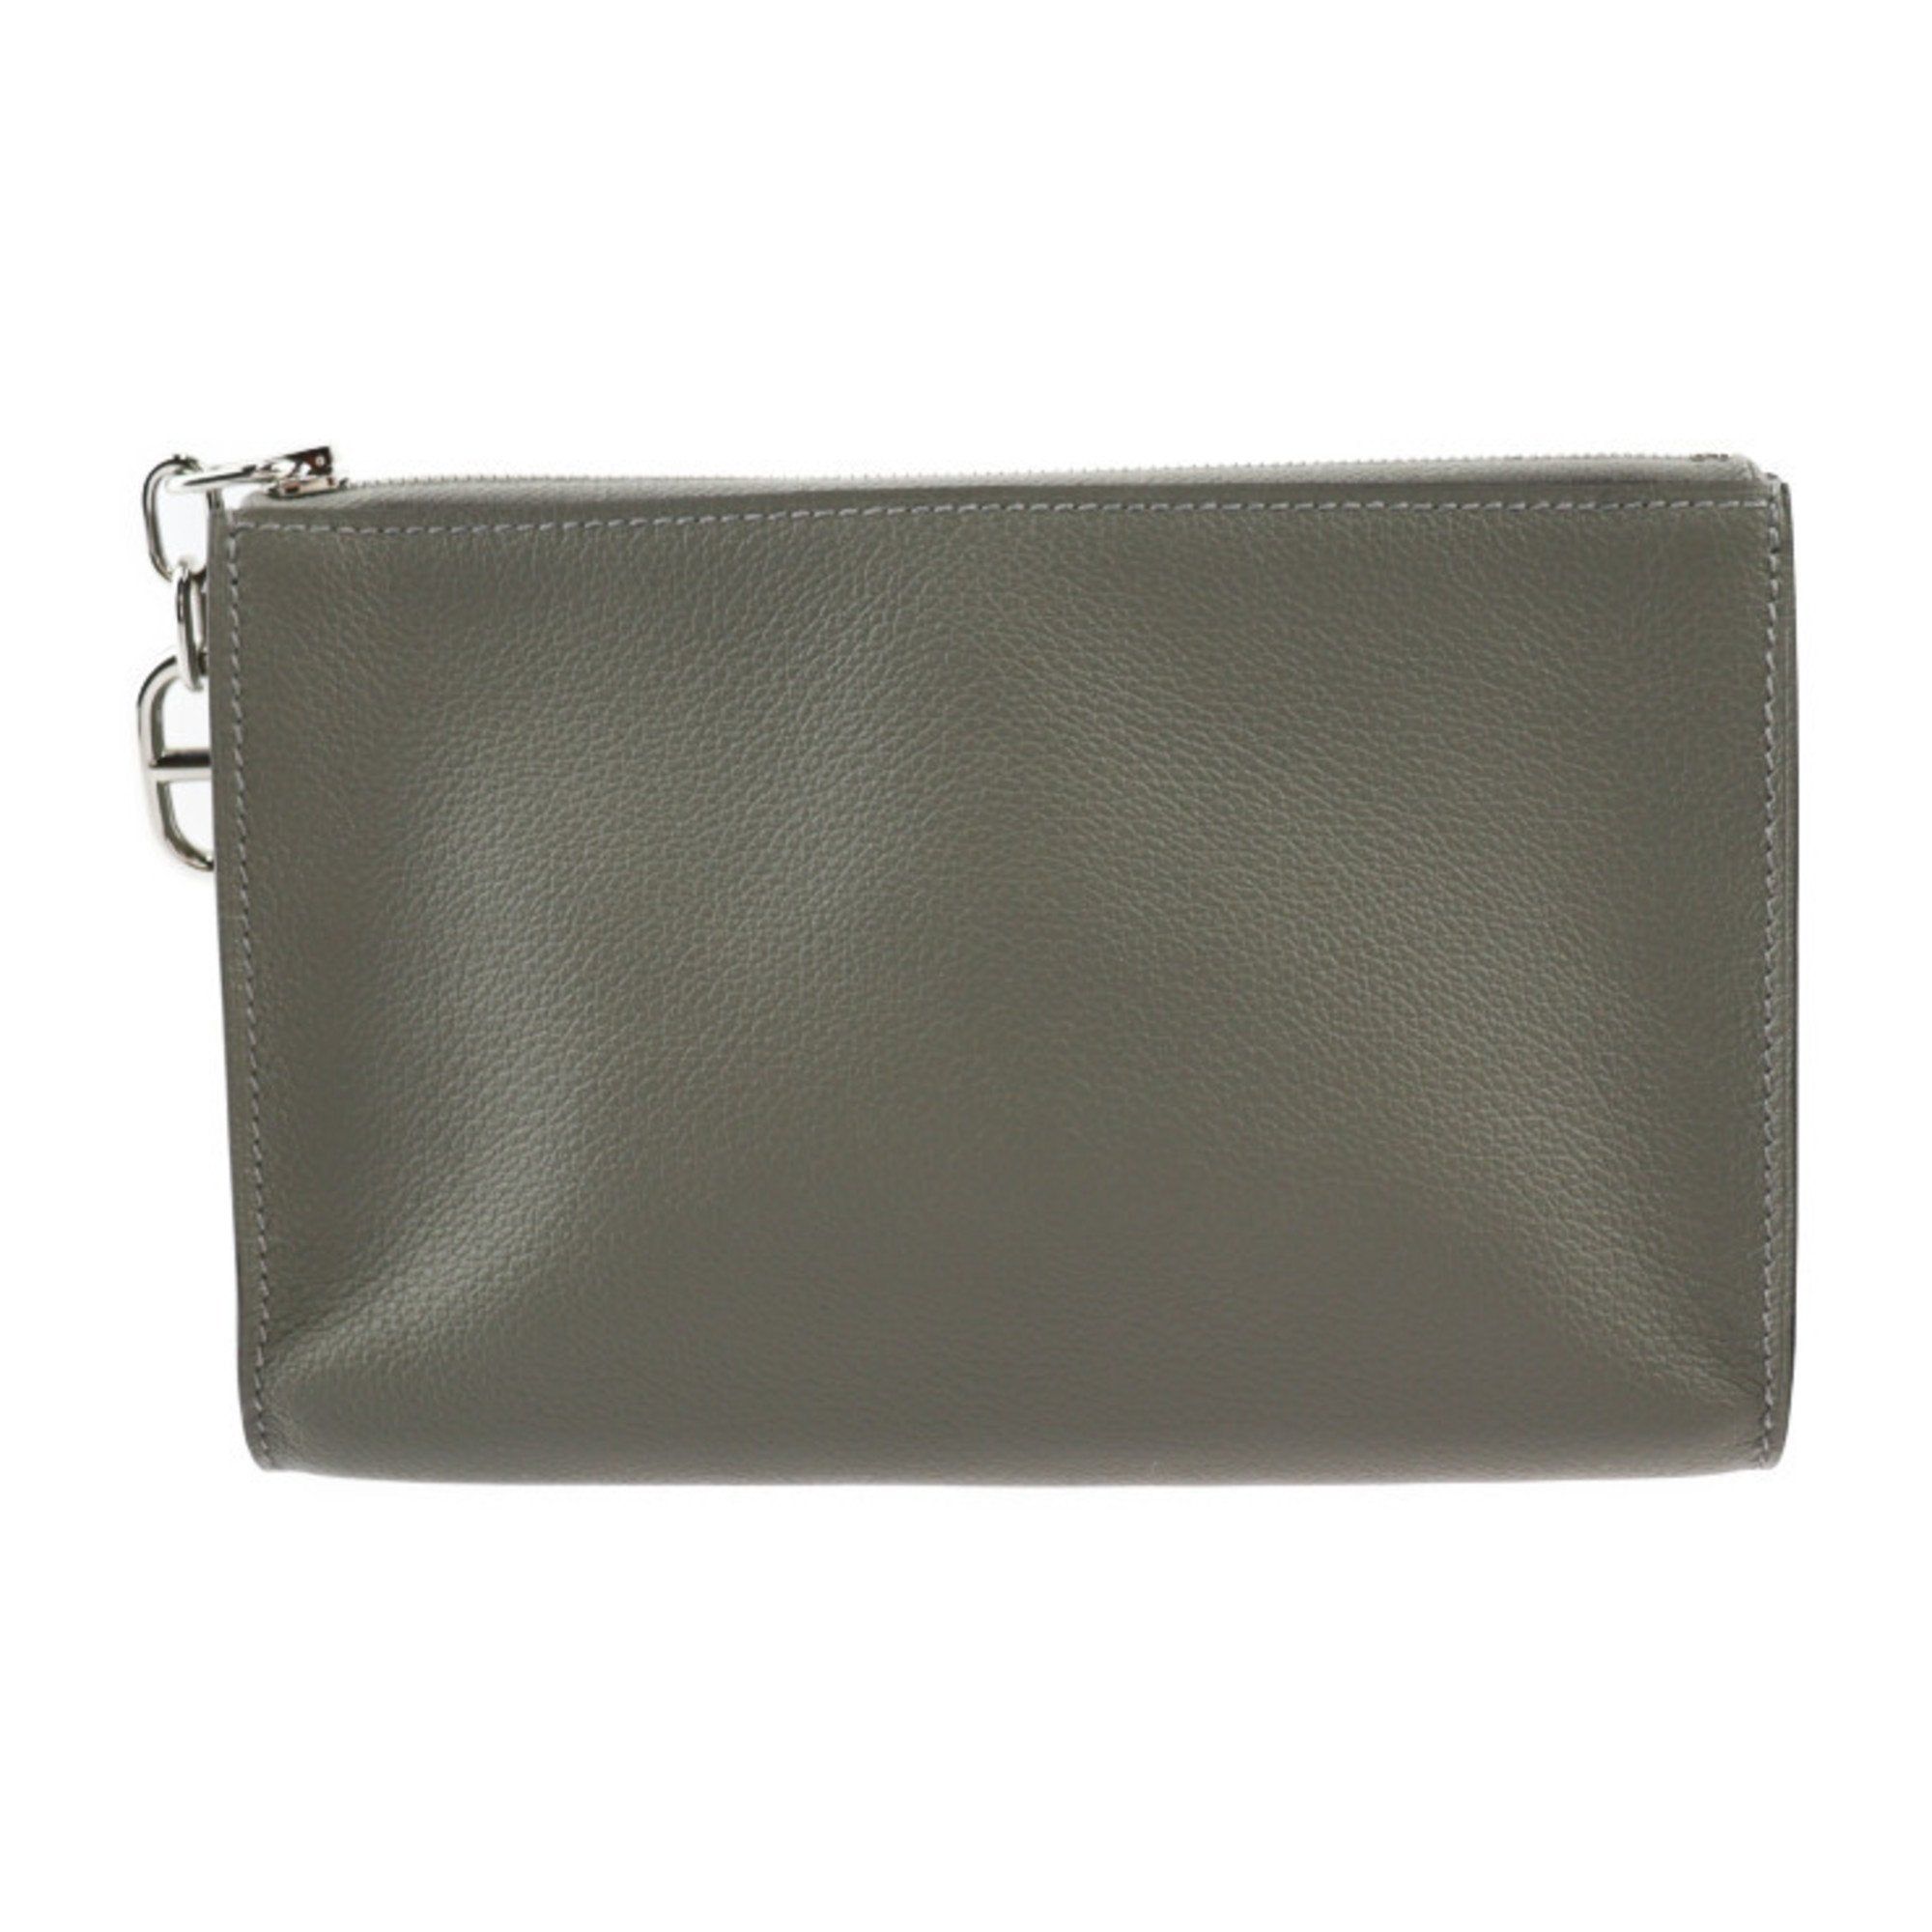 image of Hermes Zip Angor Pm Pouch Second Bag Evercolor Grimeyer Silver Hardware Clutch Chaine D'ancle B Eng